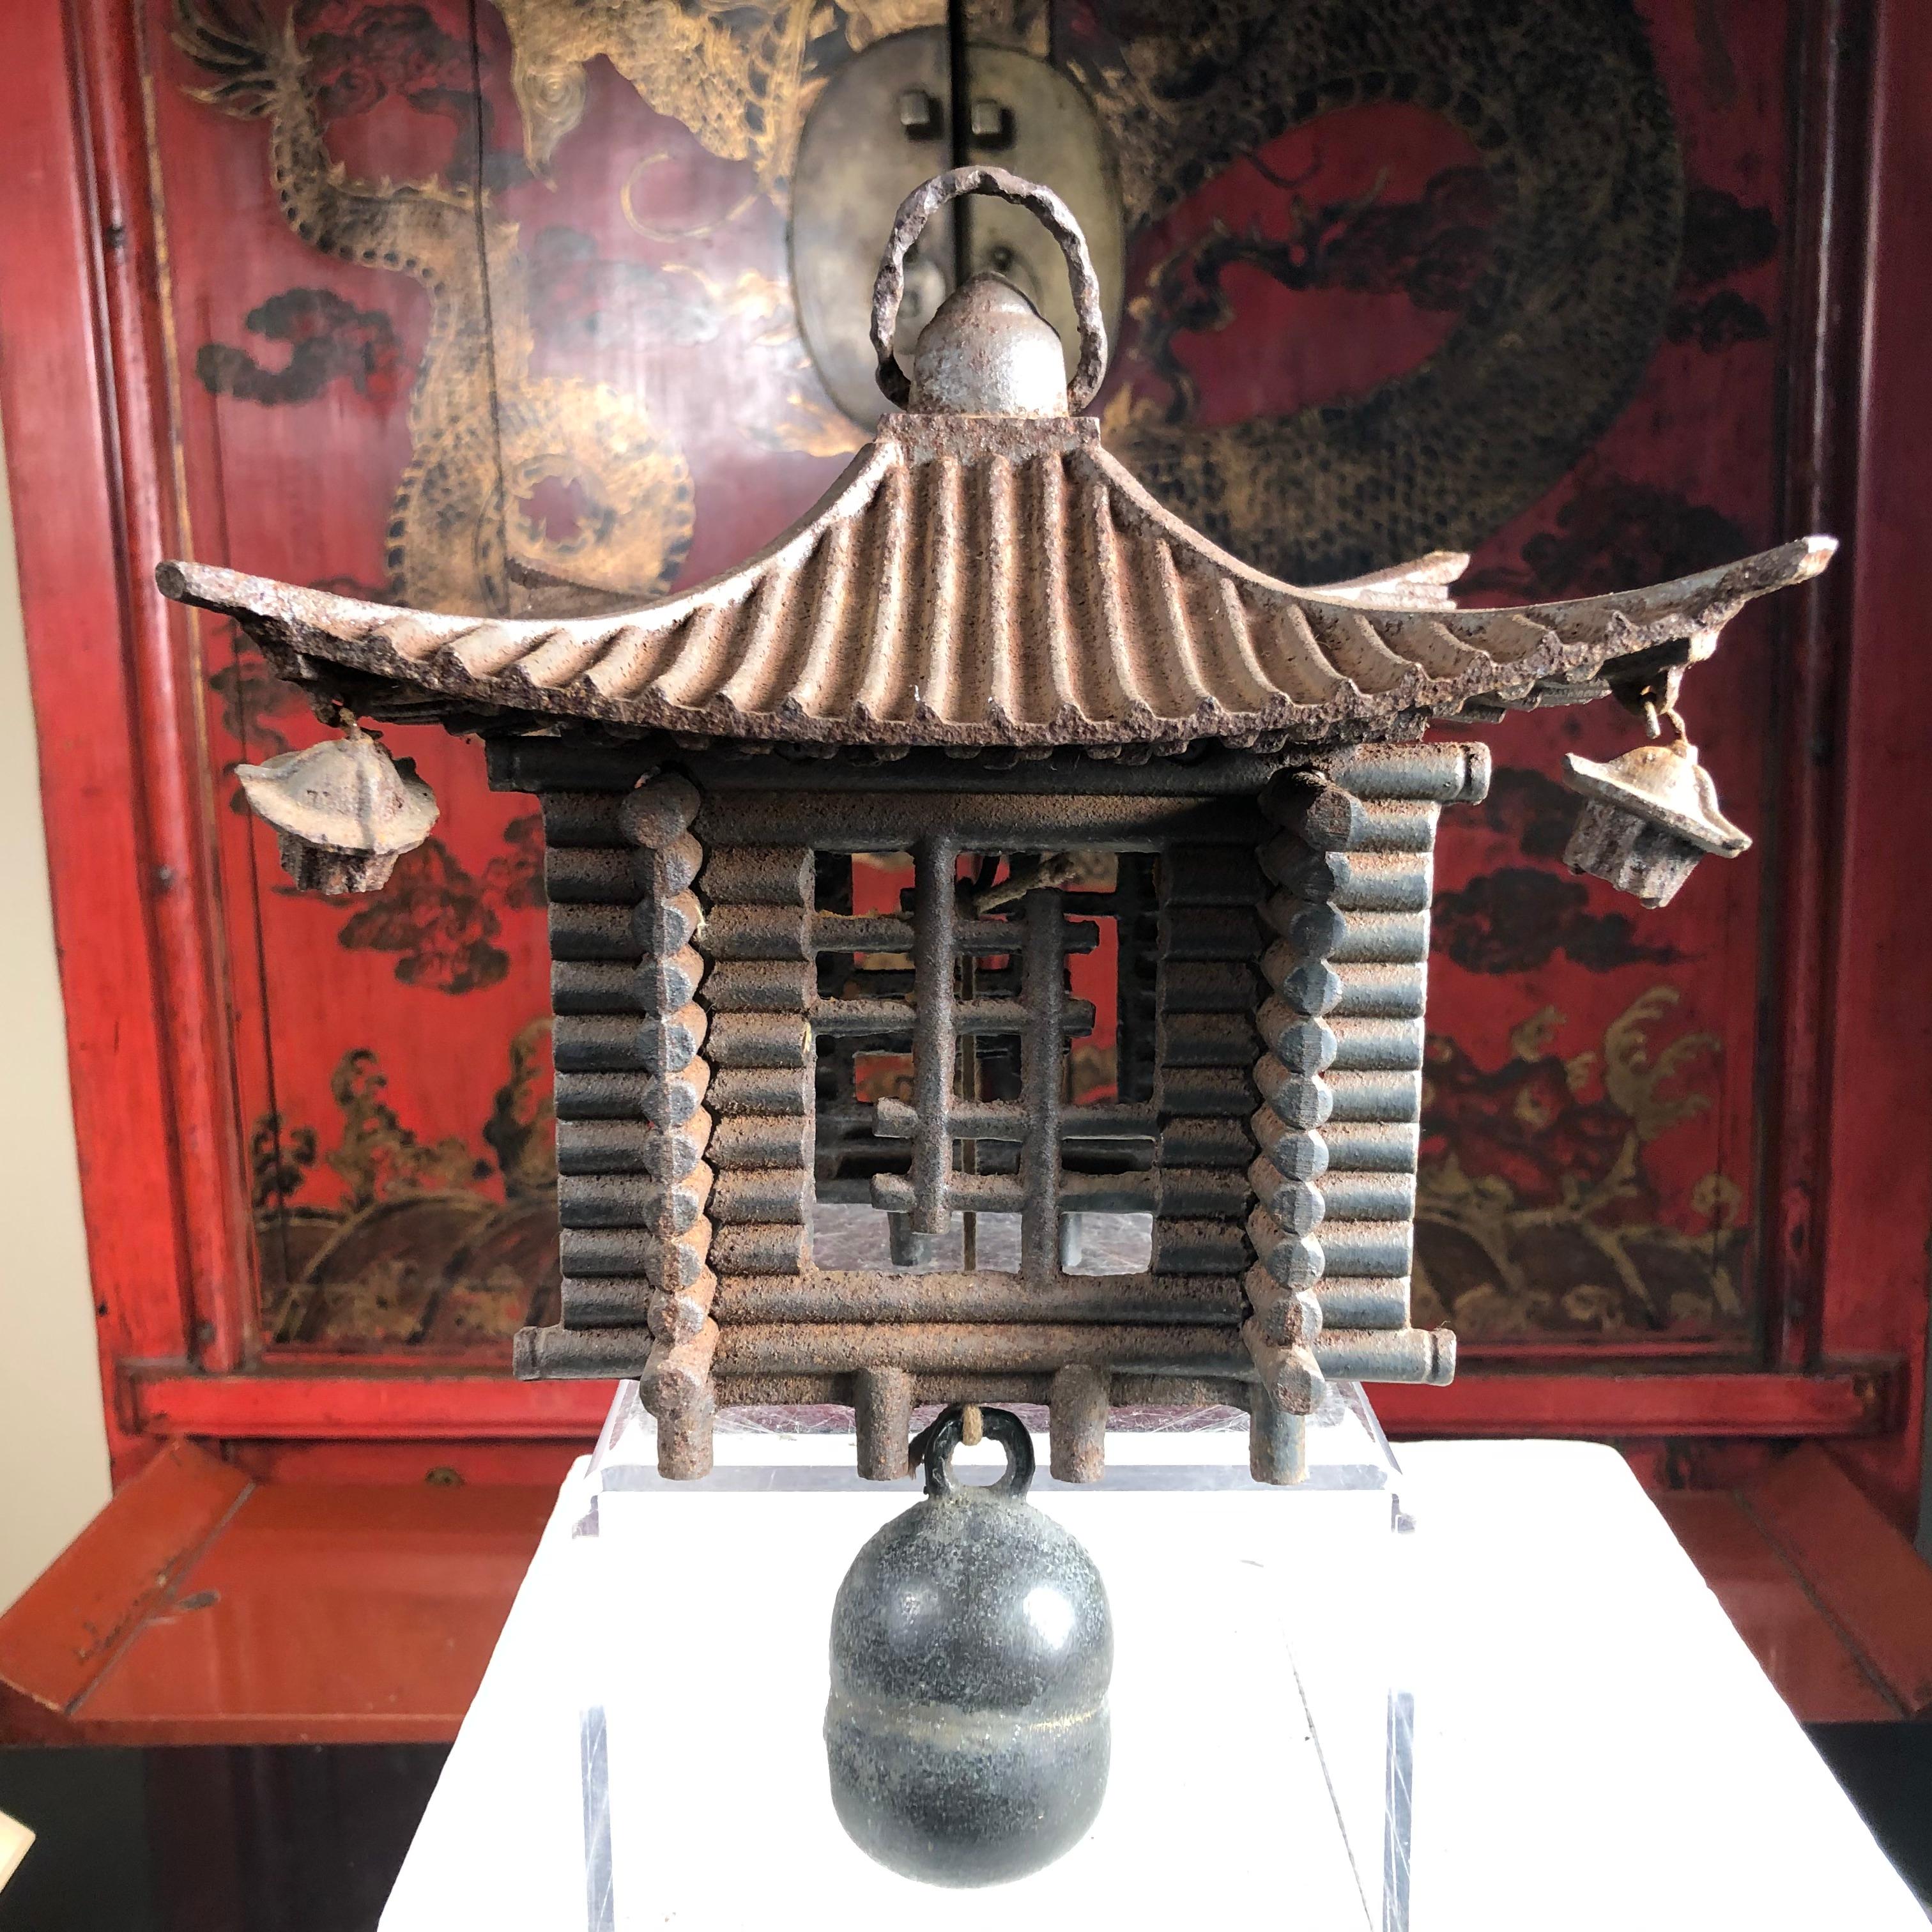 A first of its kind.

Japan, an unusual hand cast ringing lantern or wind chime in the form of a Japanese mountain cabin that may be suspended or placed on any surface in your favorite indoor or outdoor space. 

Includes a lovely old hanging